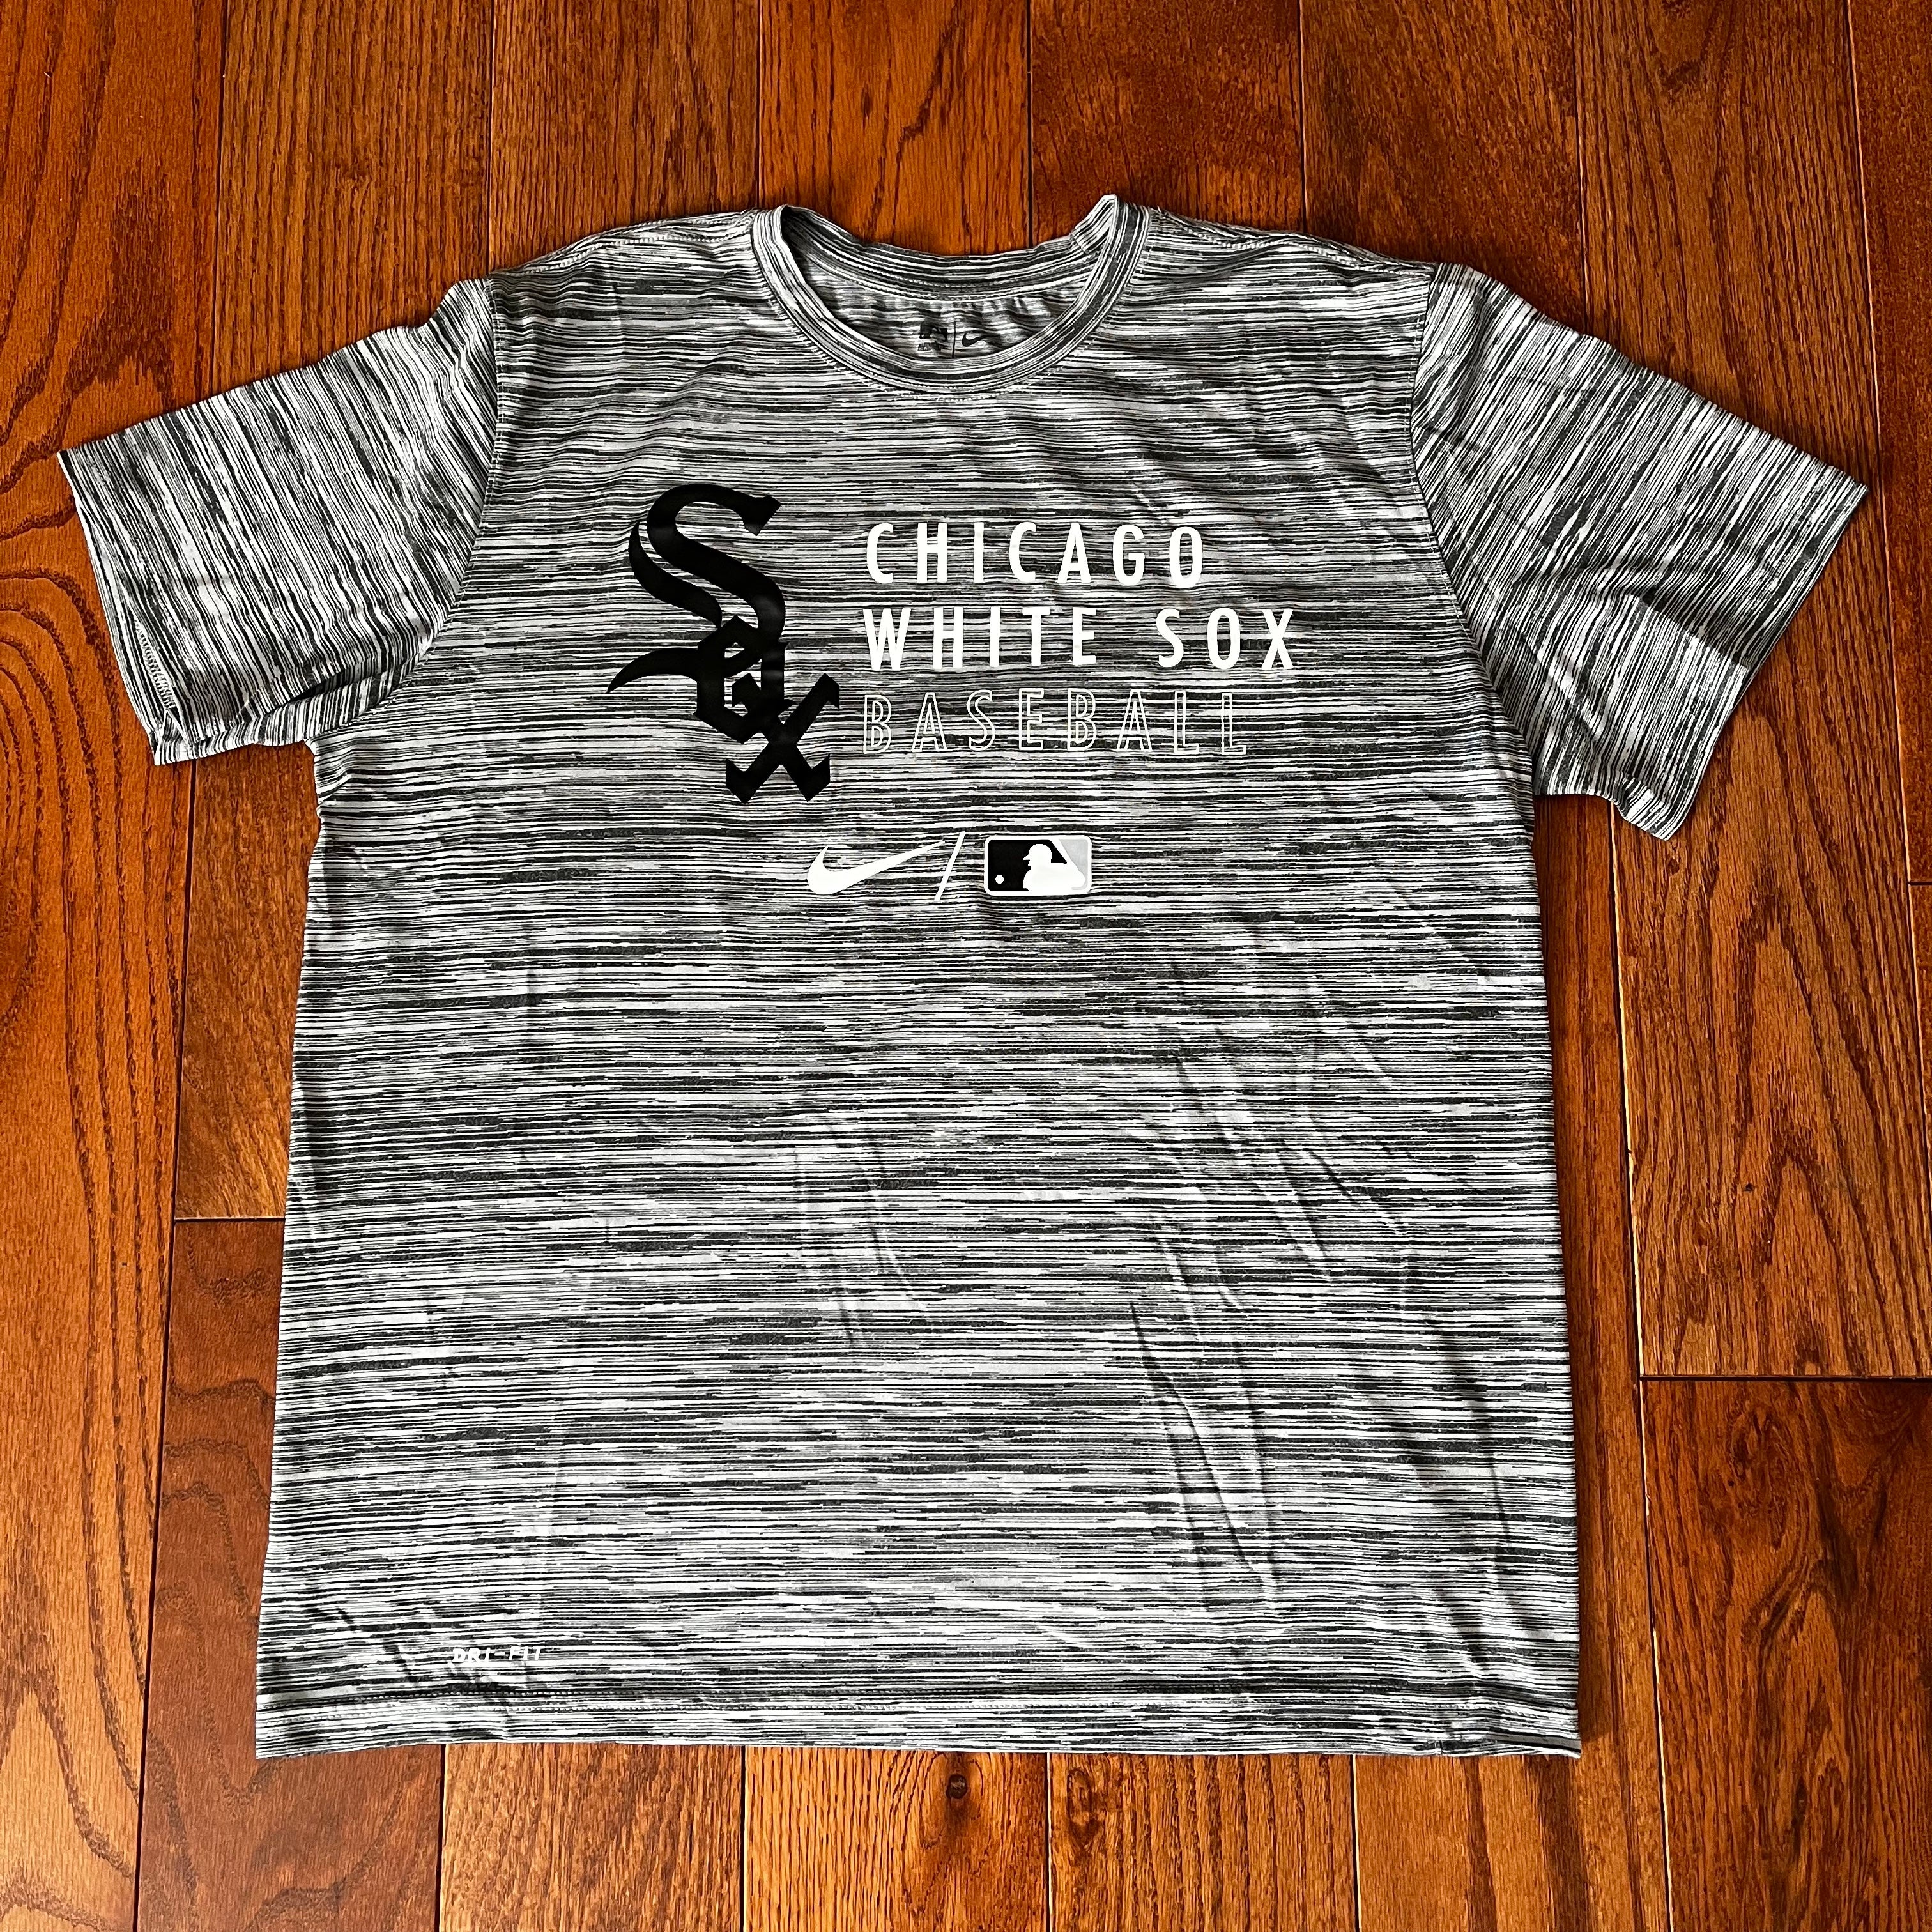 Team Issued Chicago White Sox Nike BP Shirt Size Large